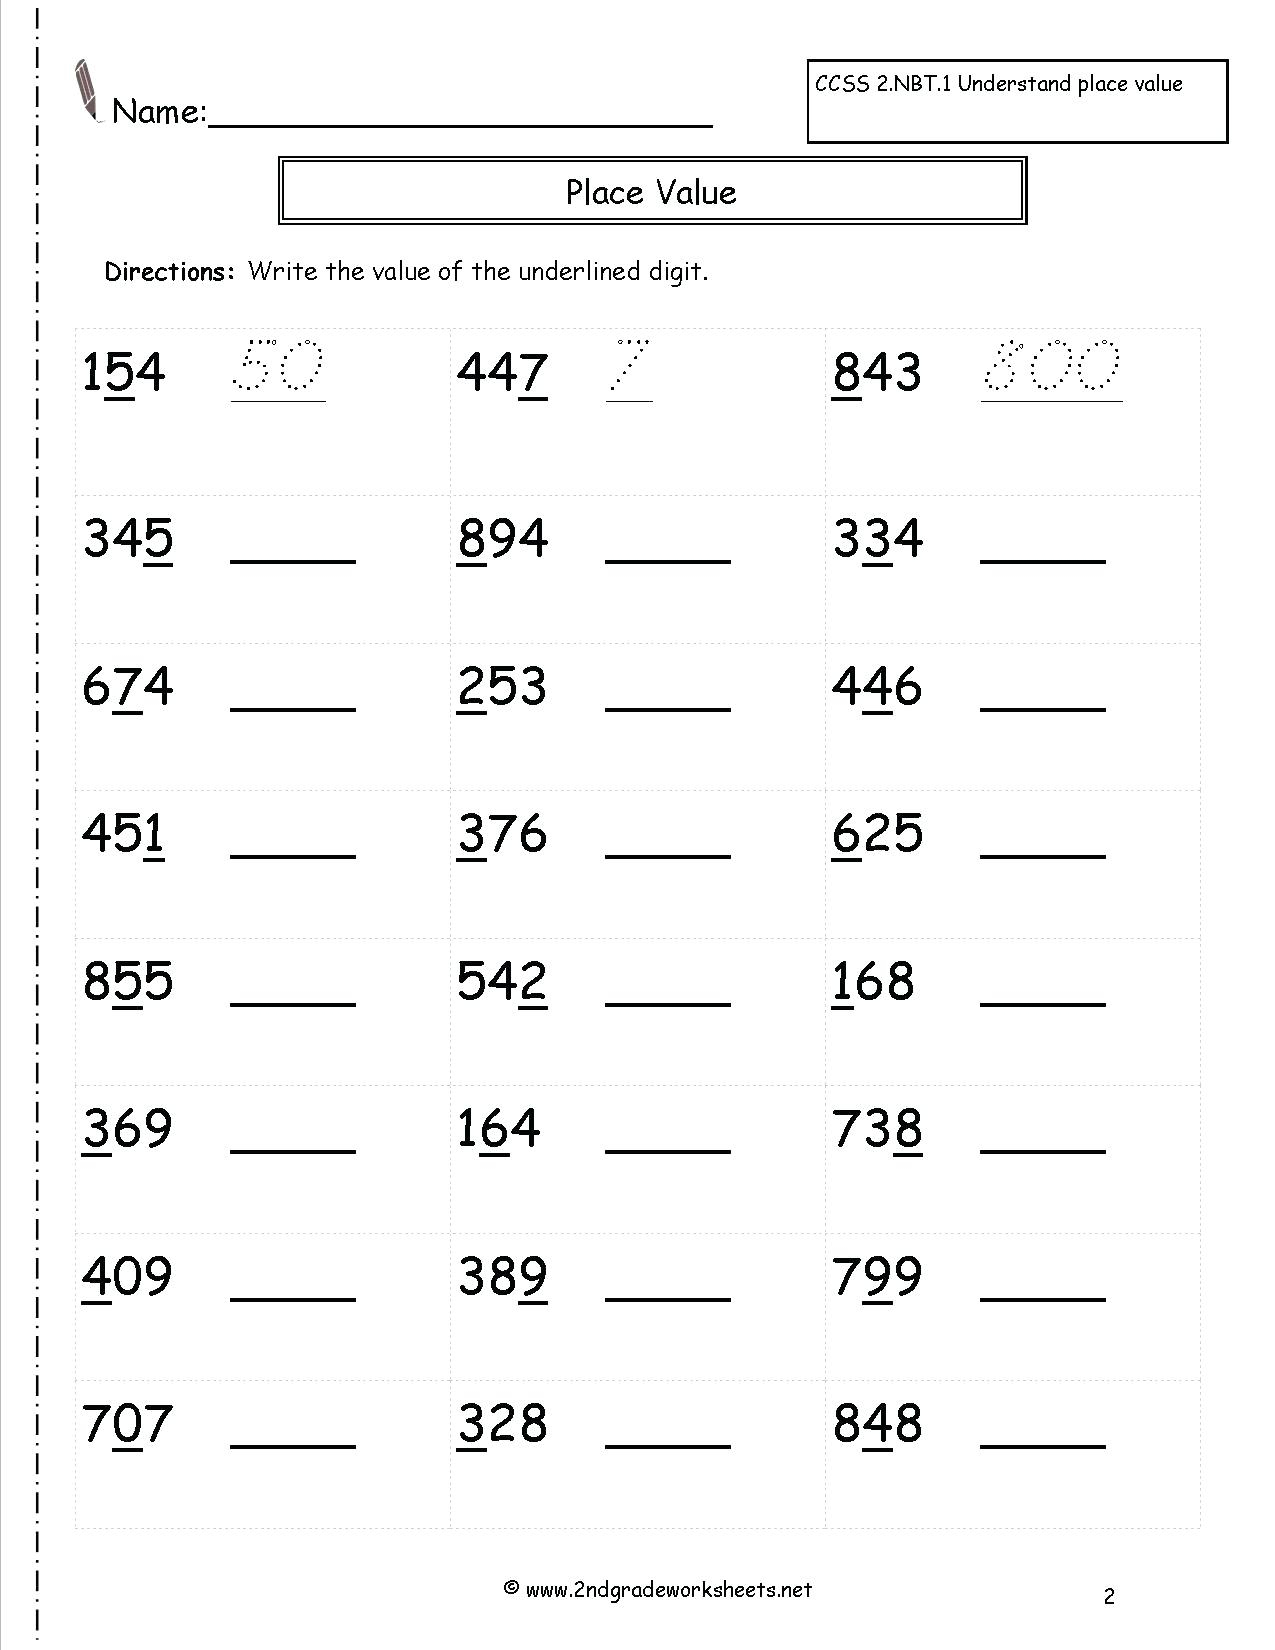 Rounding Worksheets 4Th Grade To Free - Math Worksheet For Kids - Free Printable 4Th Grade Rounding Worksheets